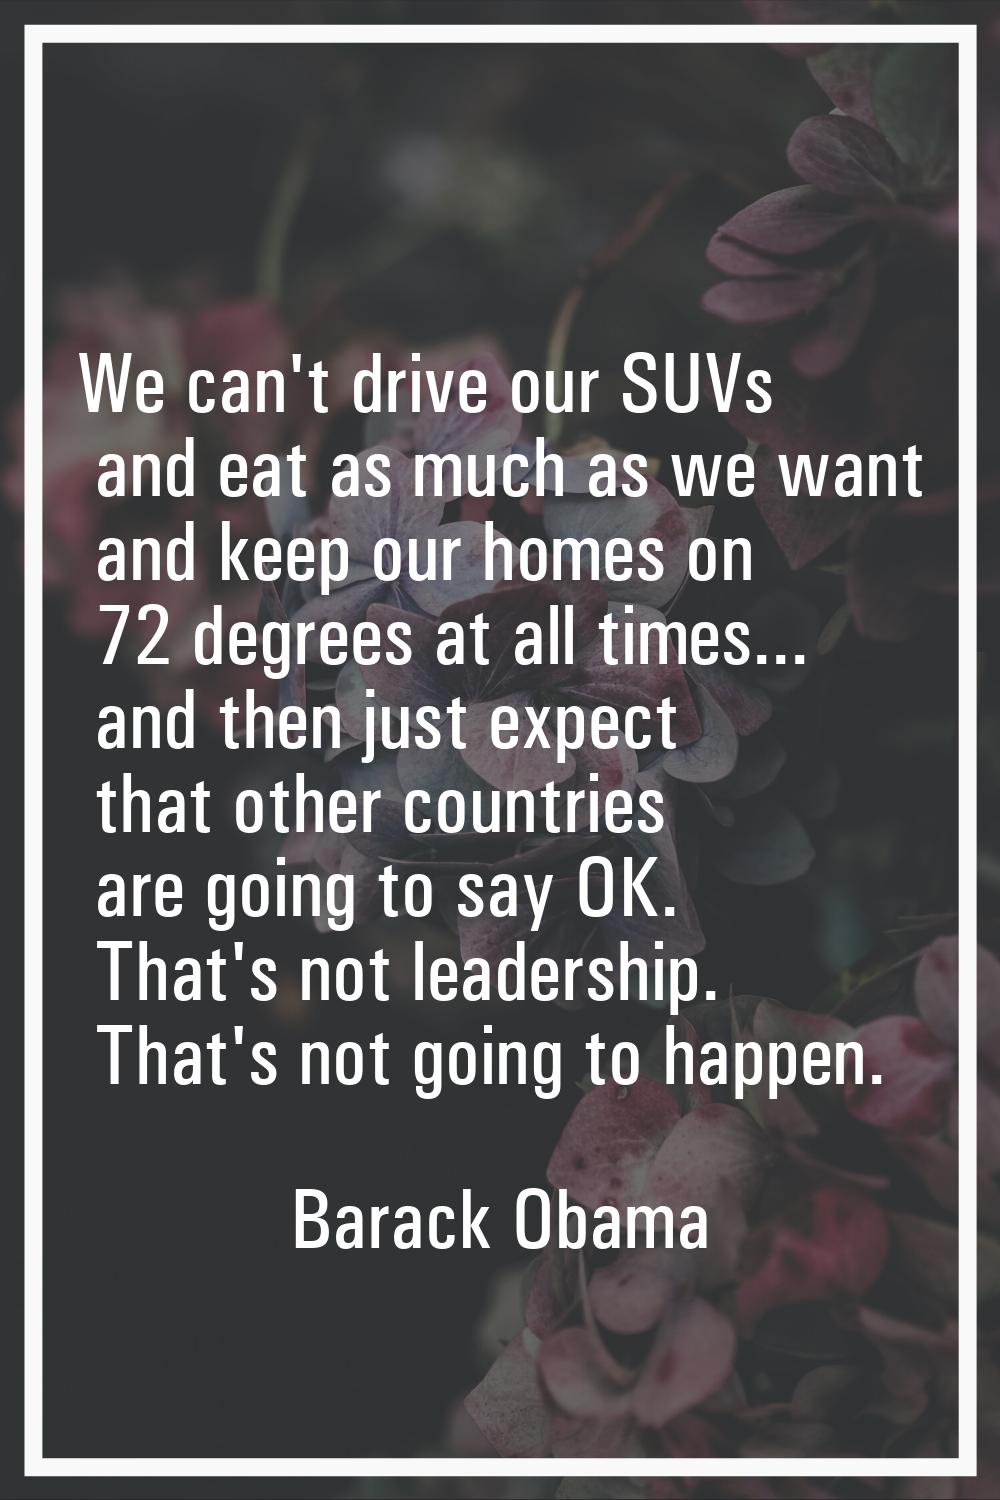 We can't drive our SUVs and eat as much as we want and keep our homes on 72 degrees at all times...